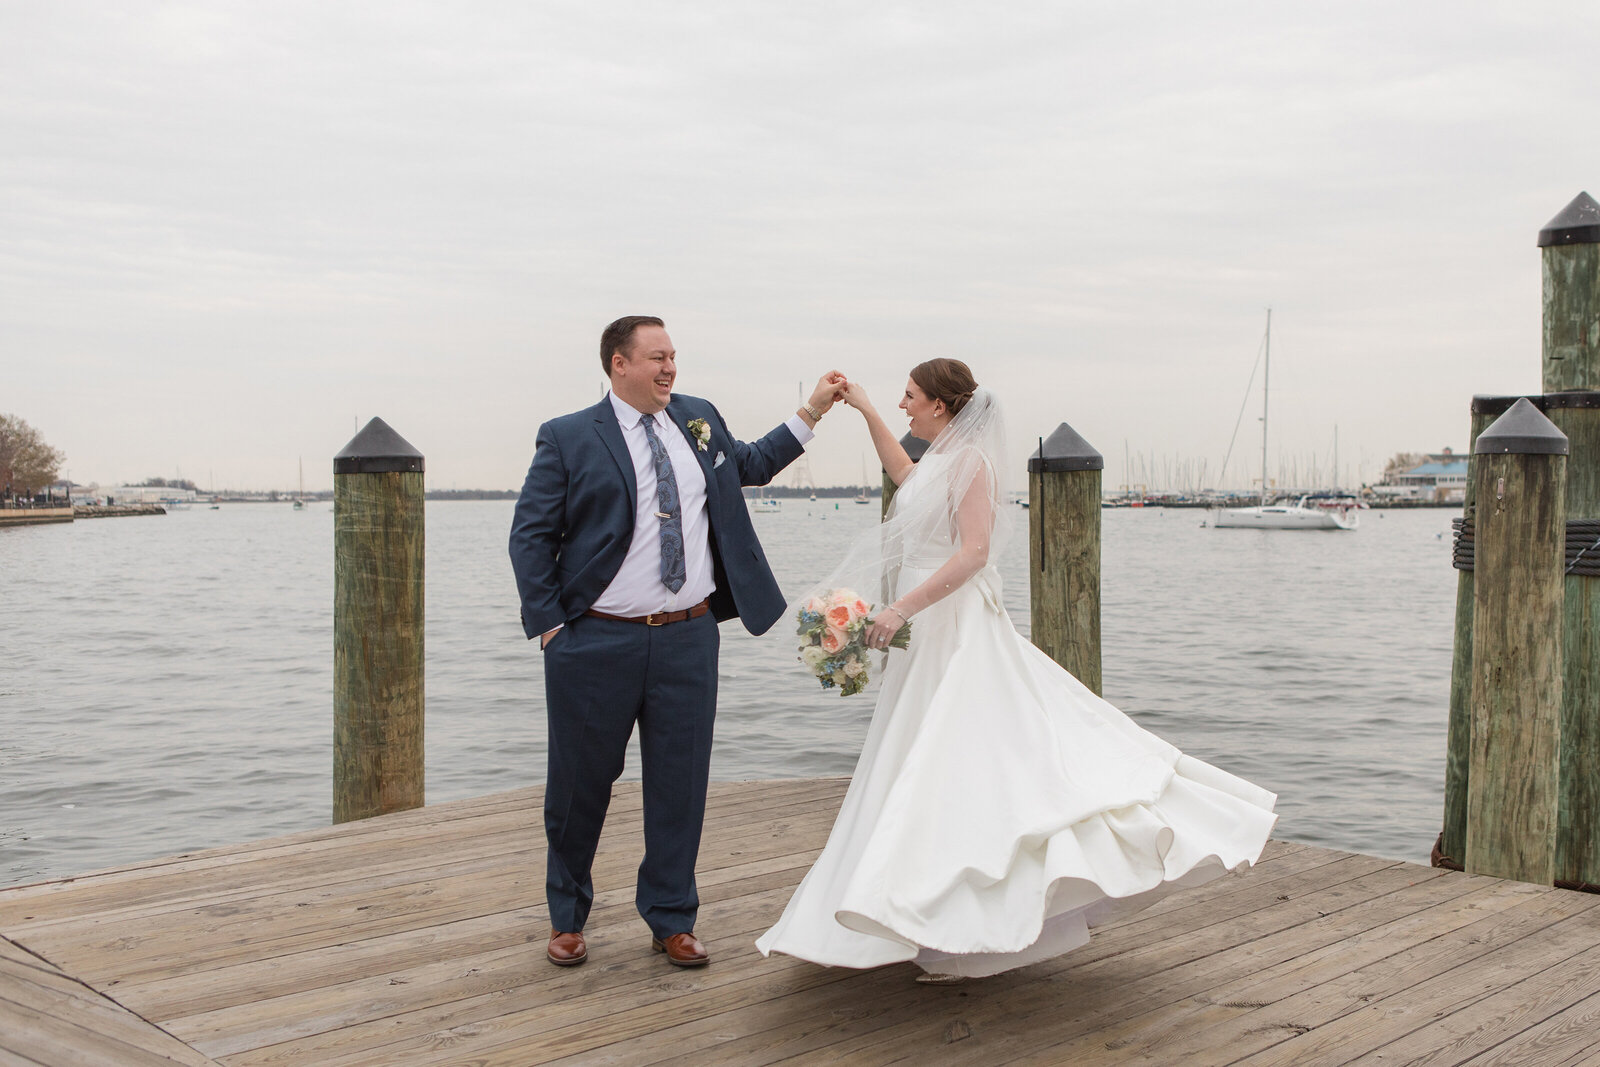 Annapolis wedding photo of couple dancing at city dock by Maryland photographer Christa Rae Photography